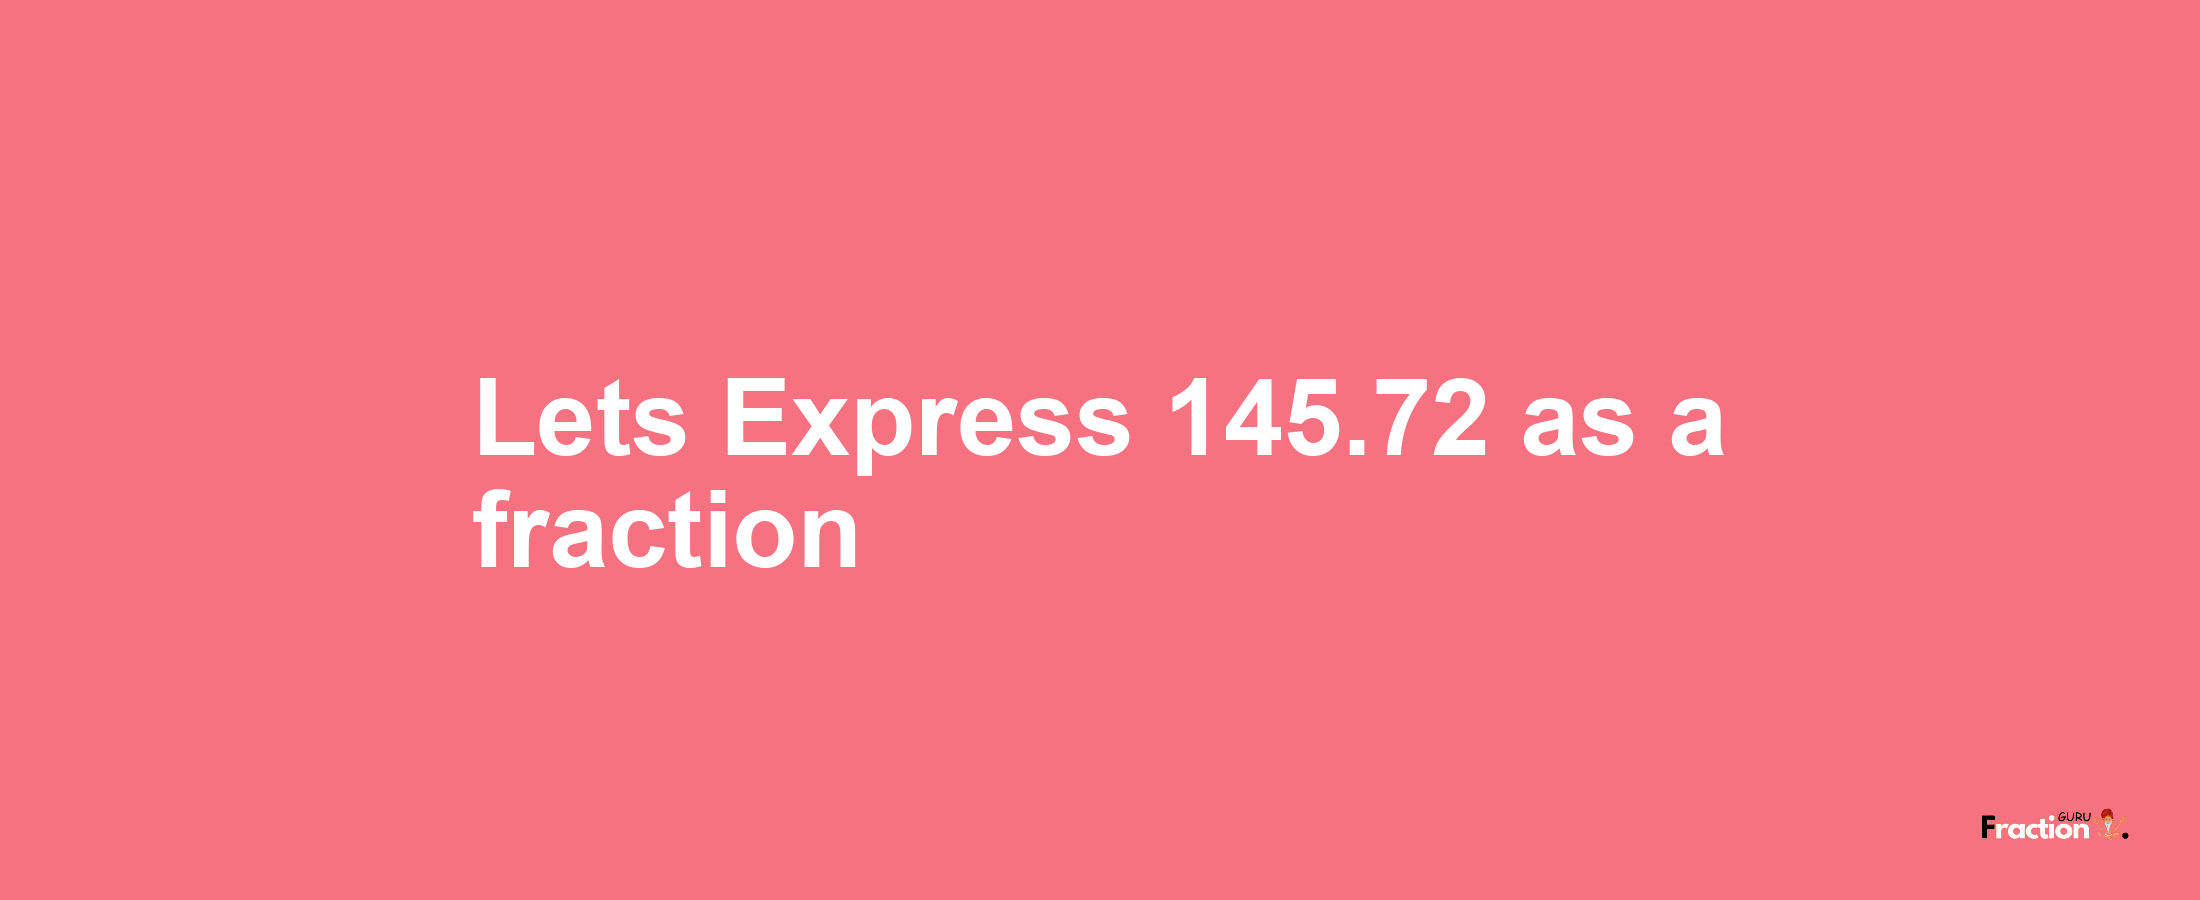 Lets Express 145.72 as afraction